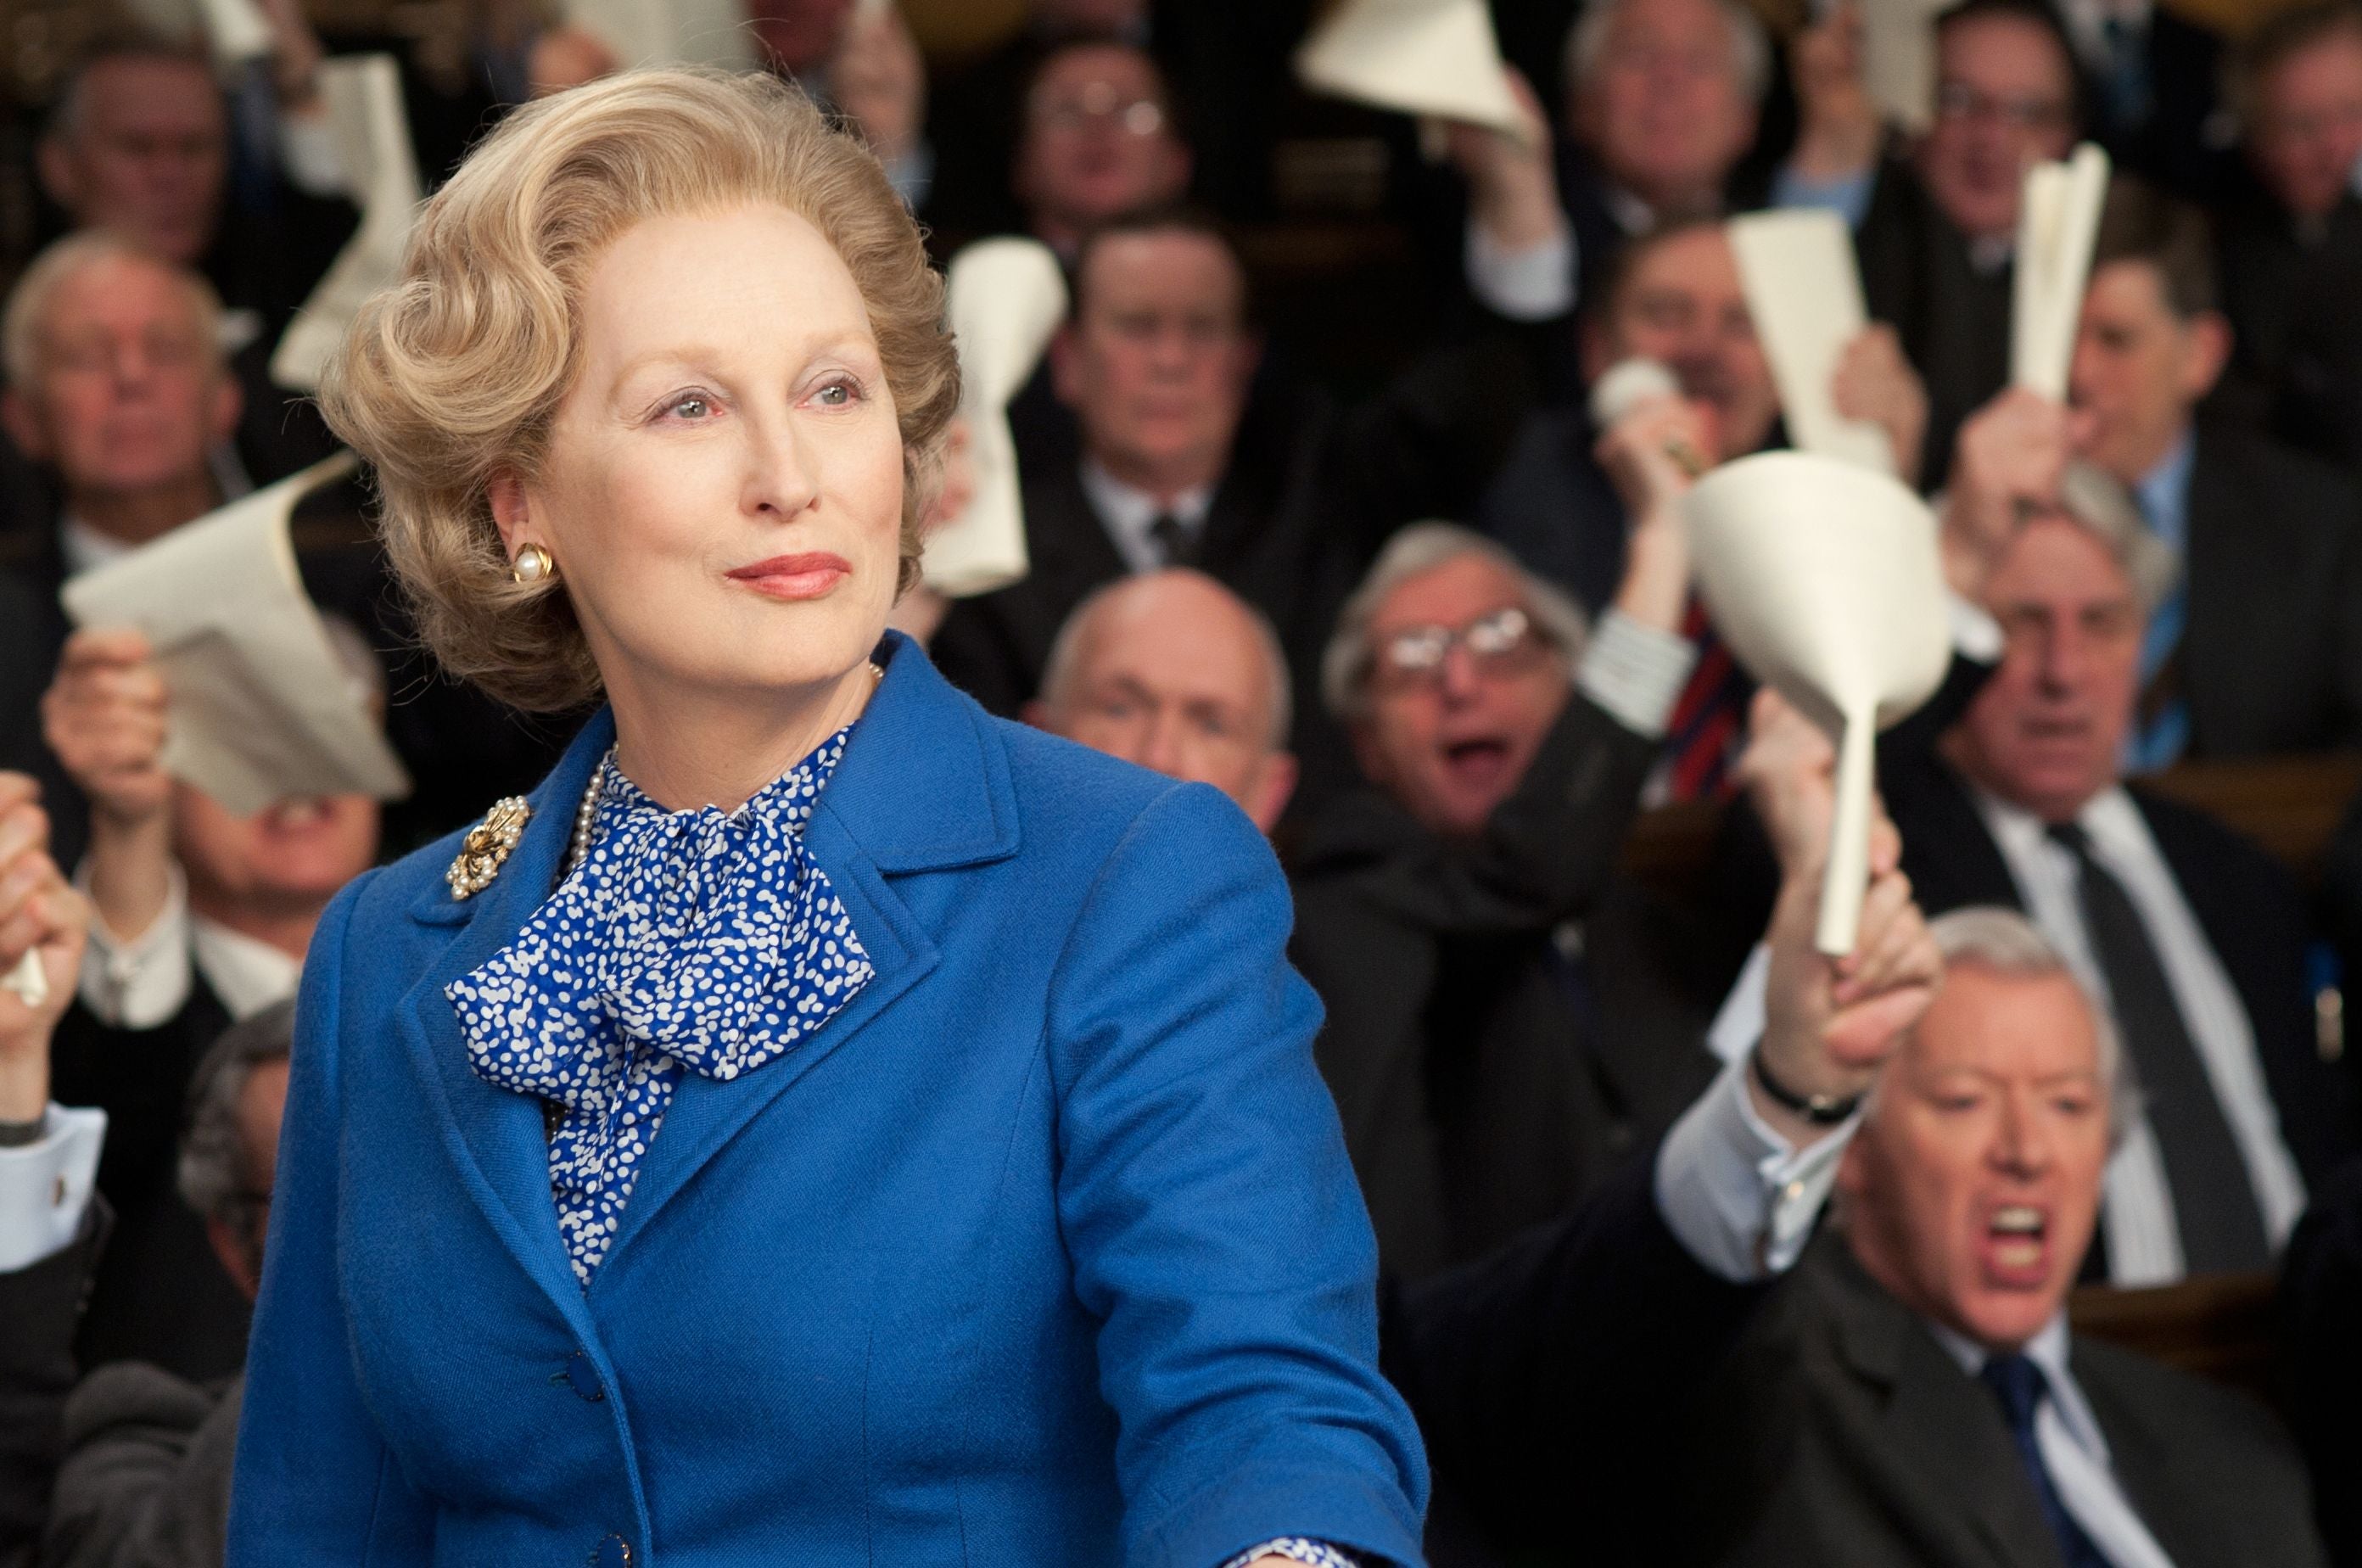 Streep won an Oscar for her role as Margaret Thatcher in Lloyd’s 2011 biopic ‘The Iron Lady’